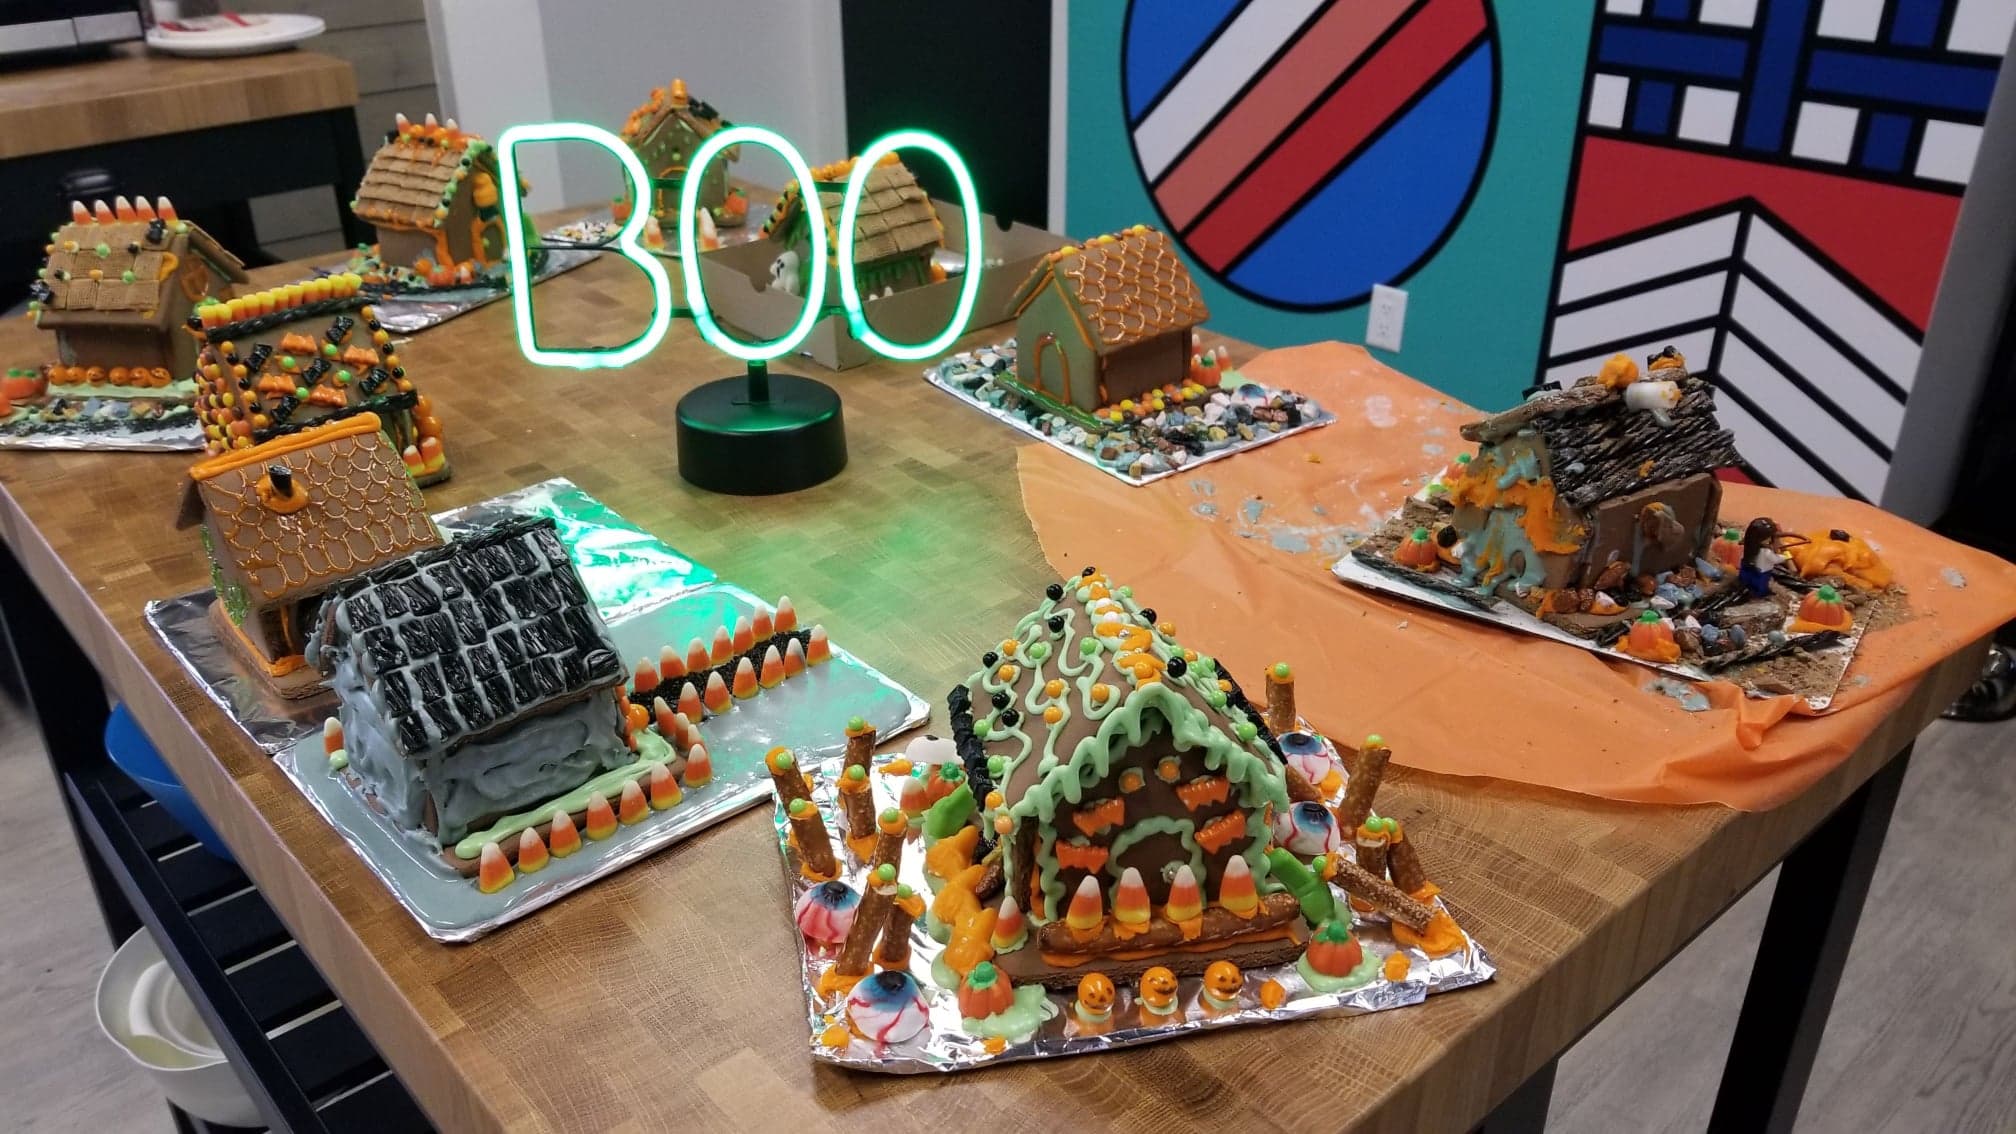 Halloween gingerbread houses made by the Kick Point team, an illuminated BOO sign at the centre of the table